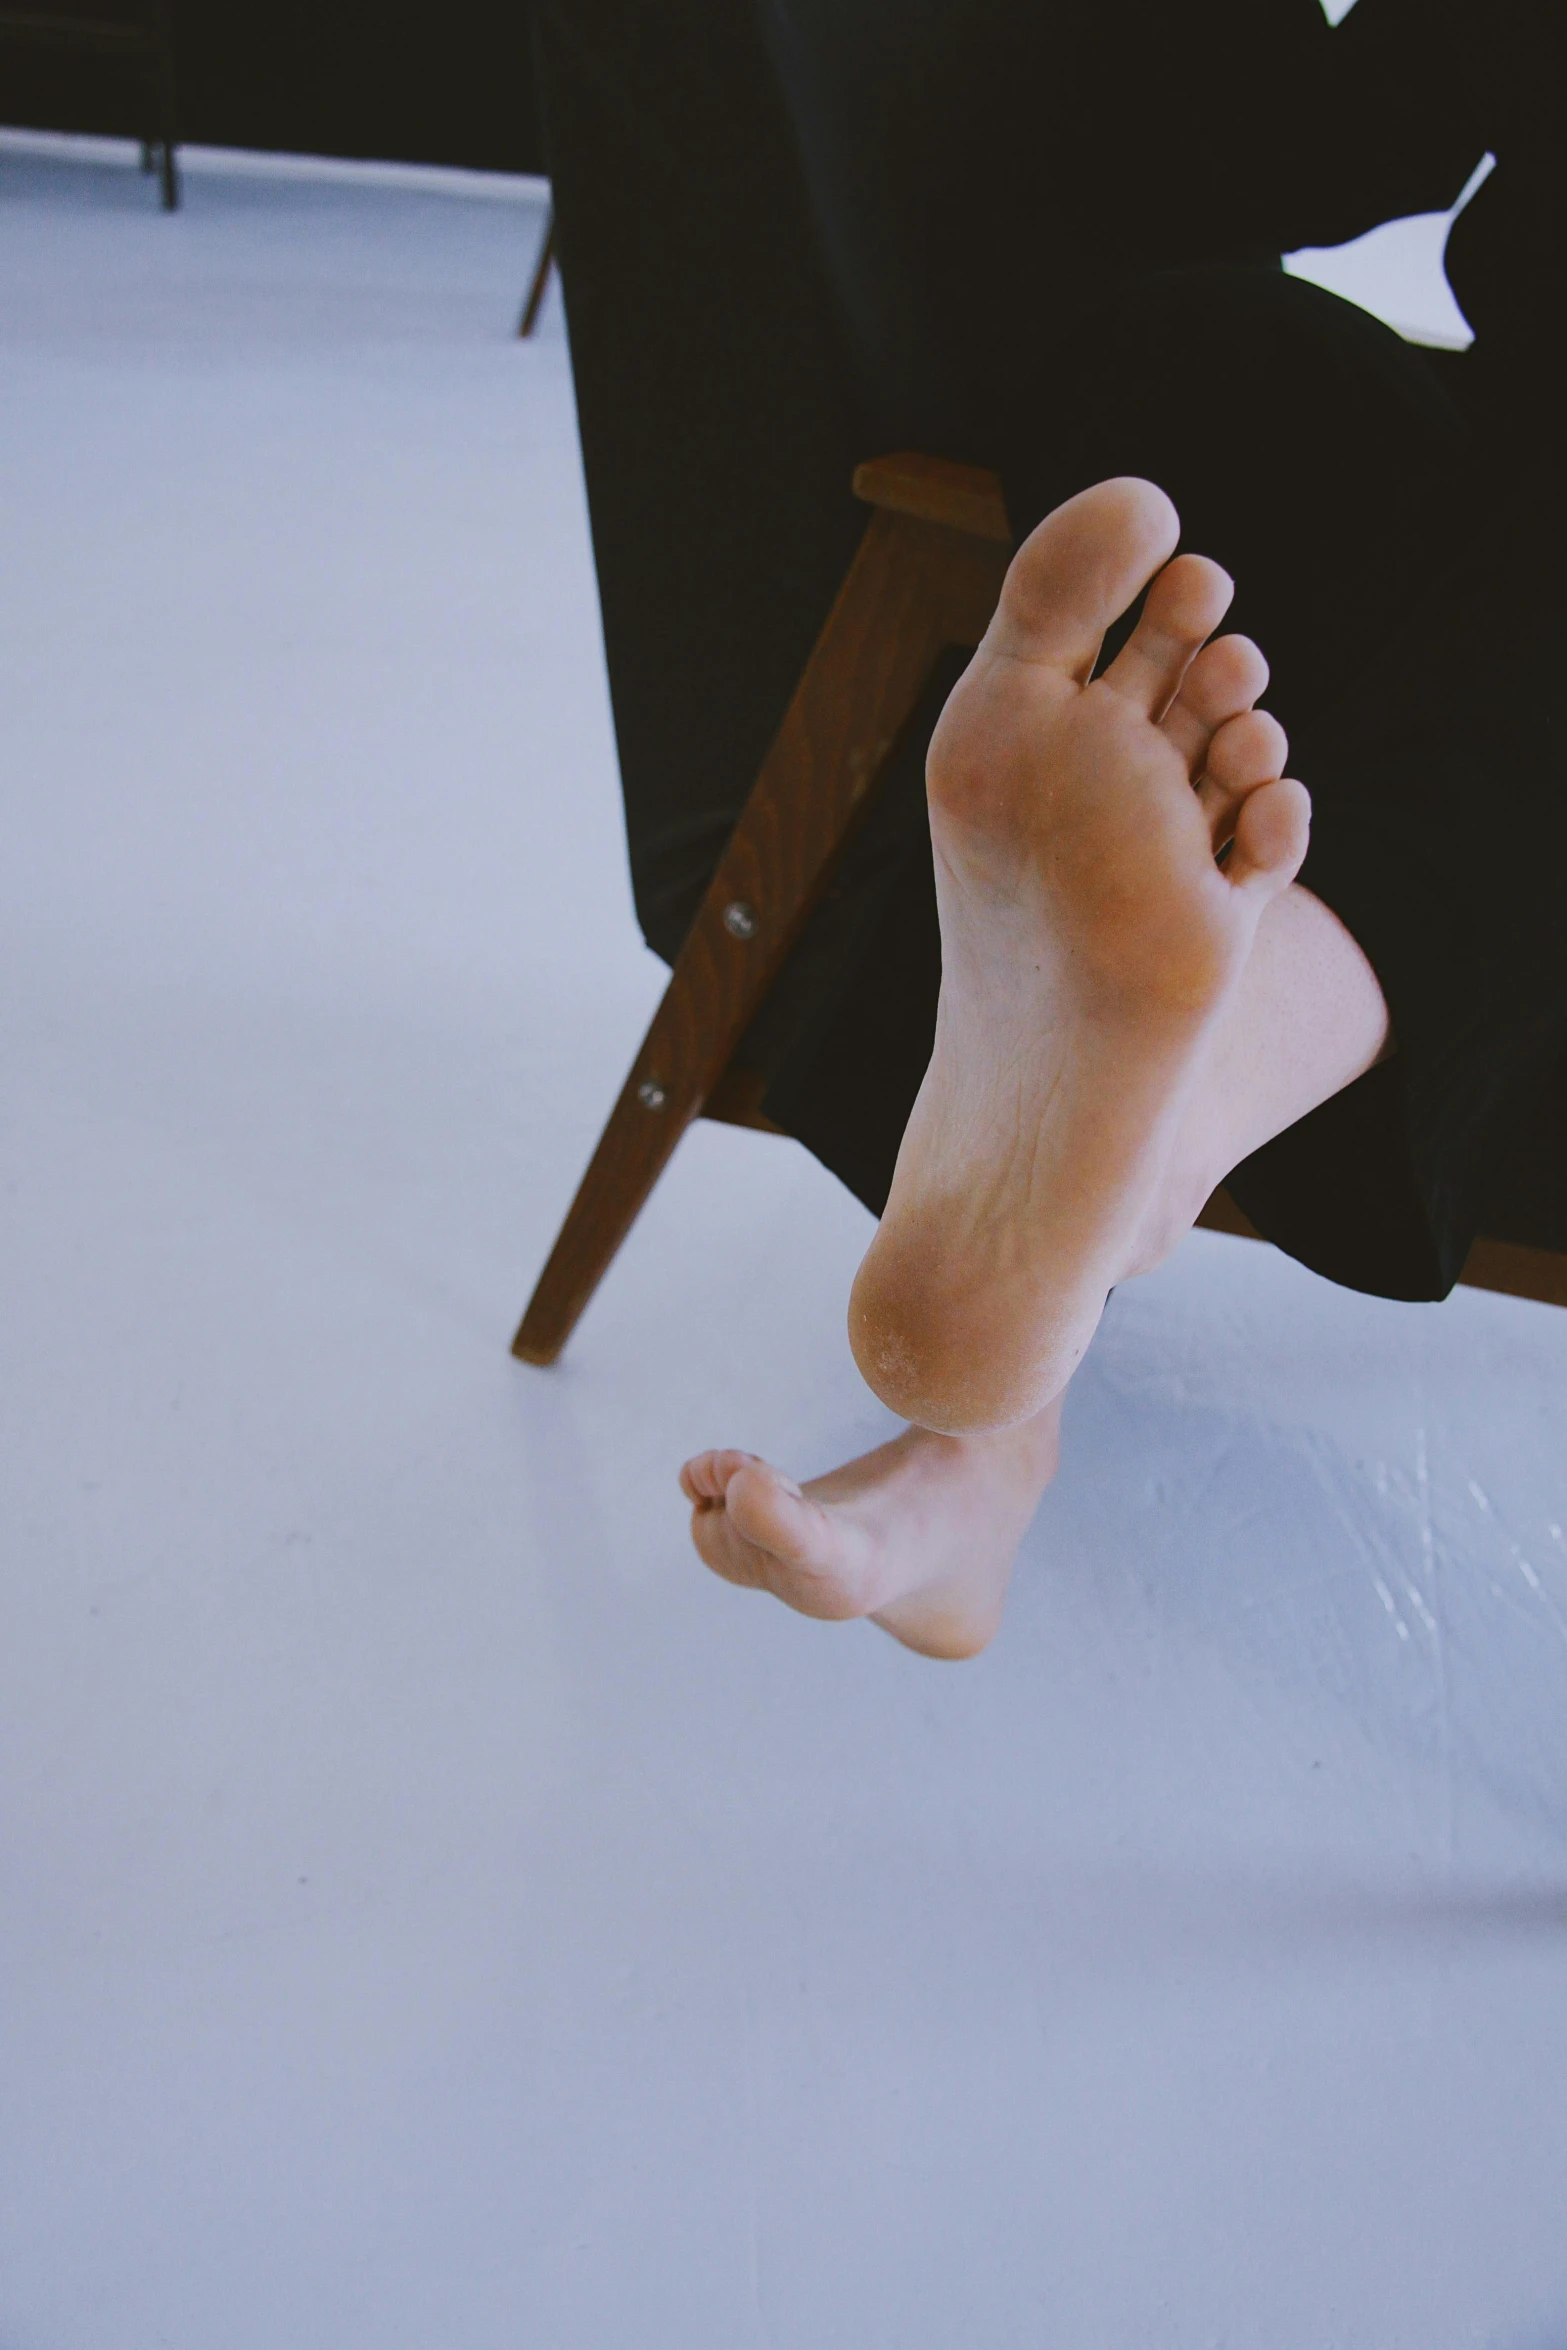 bare feet and legs of someone sitting in a chair